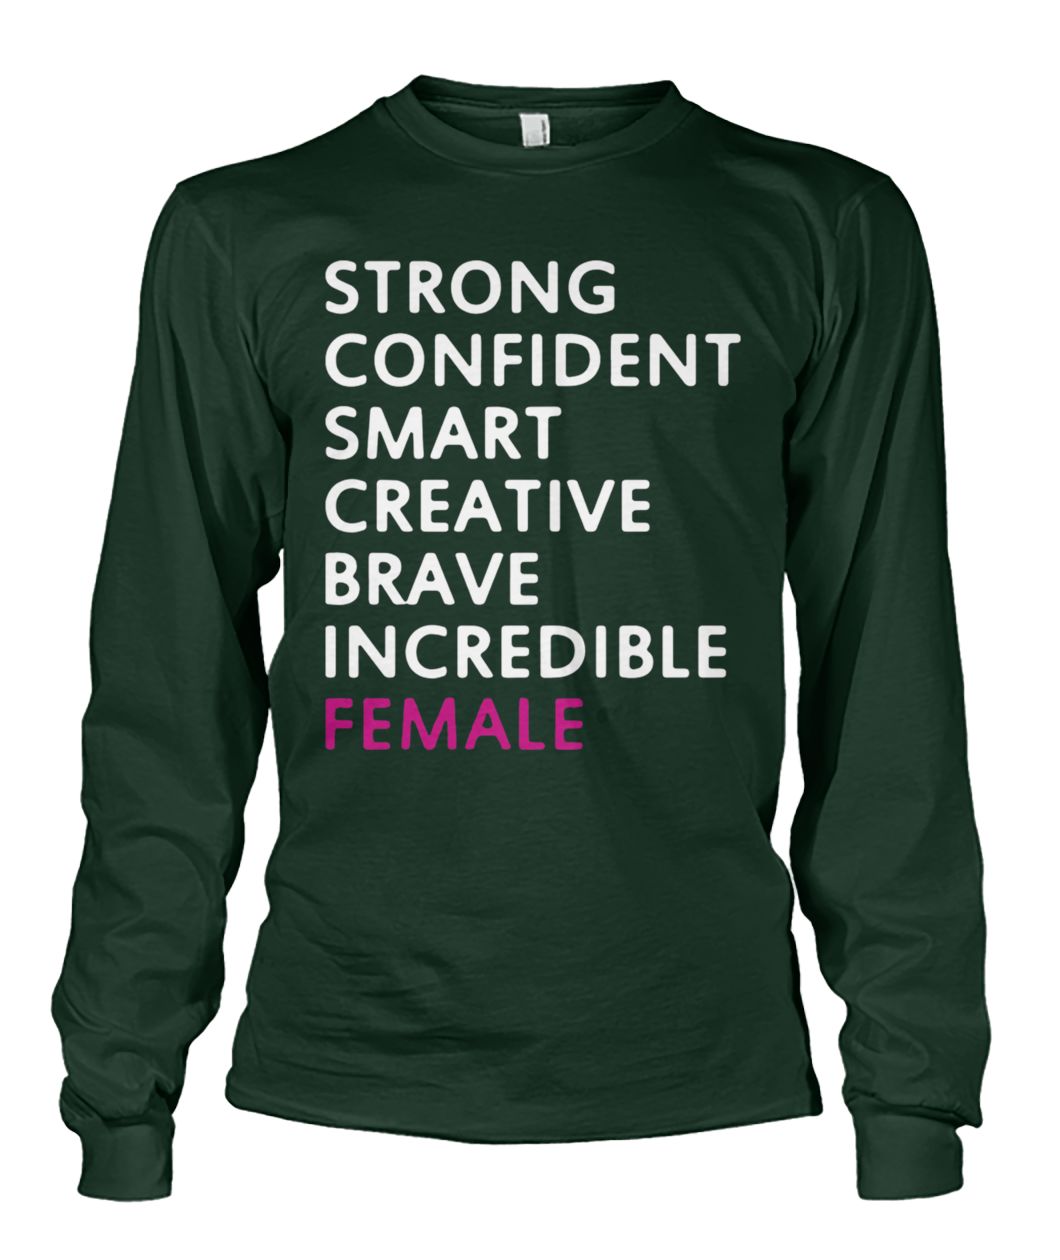 Strong confident smart creative brave incredible female unisex long sleeve